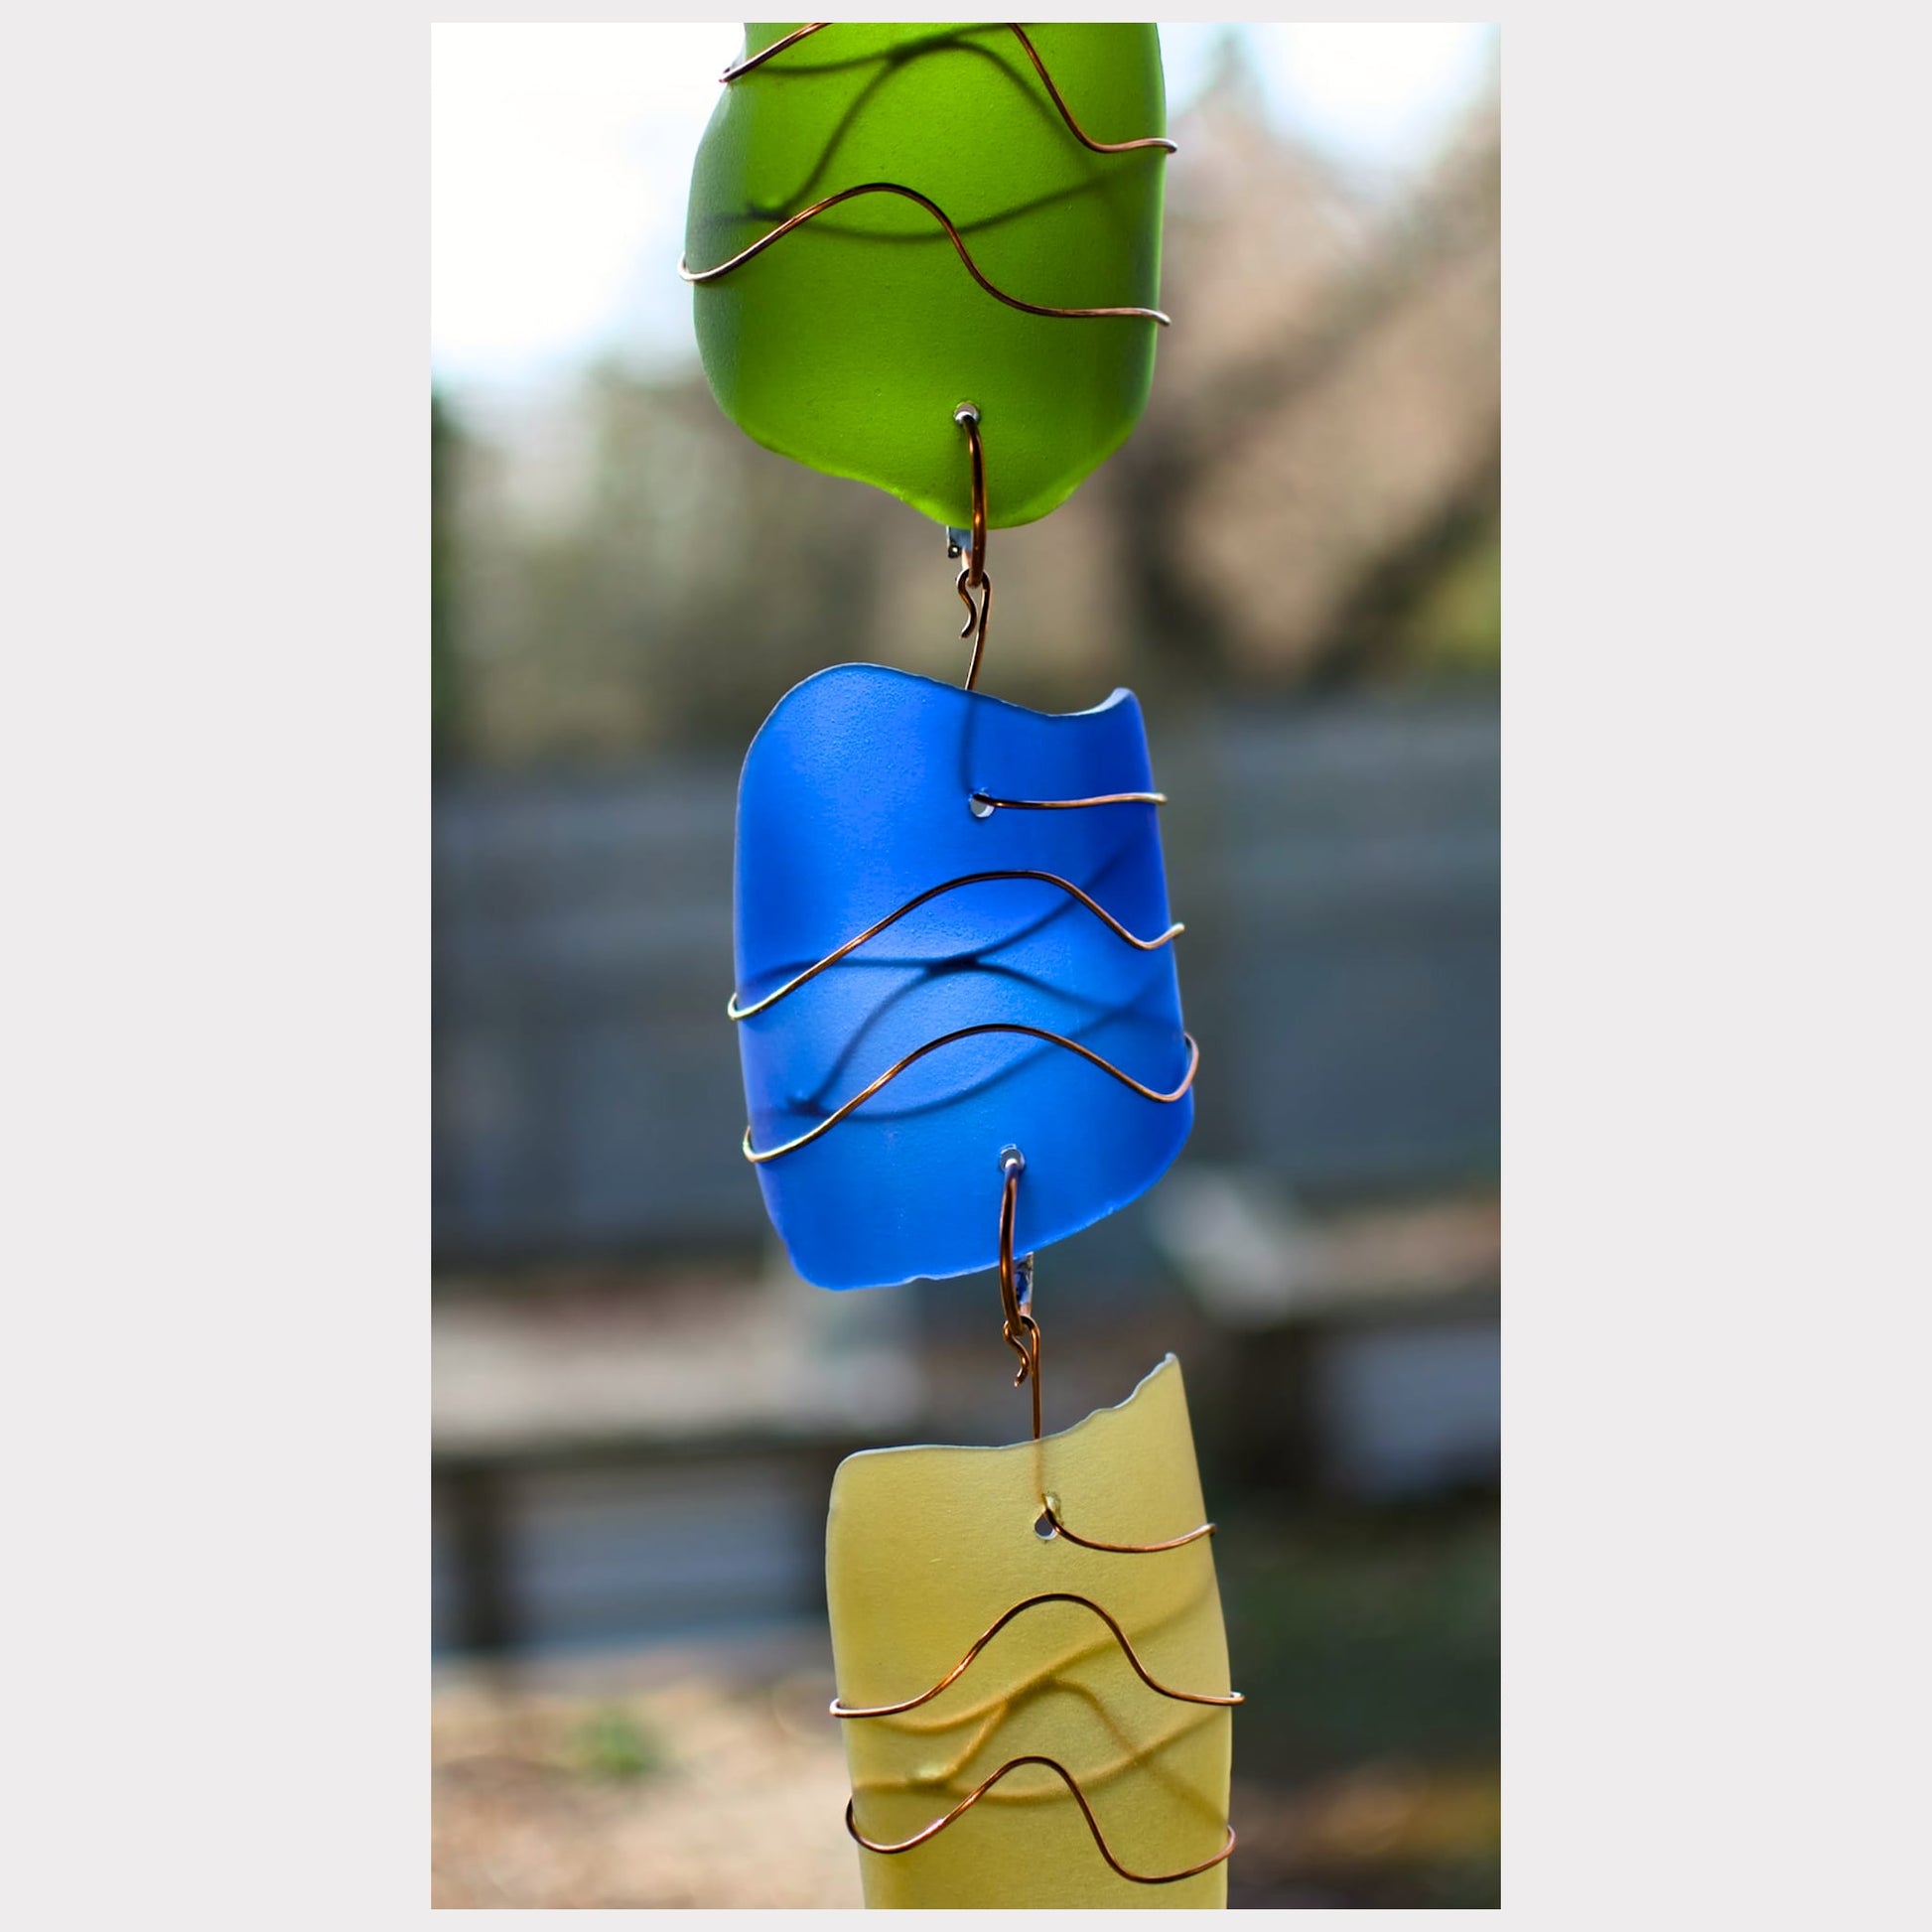 zoom detail, sea glass wind chime